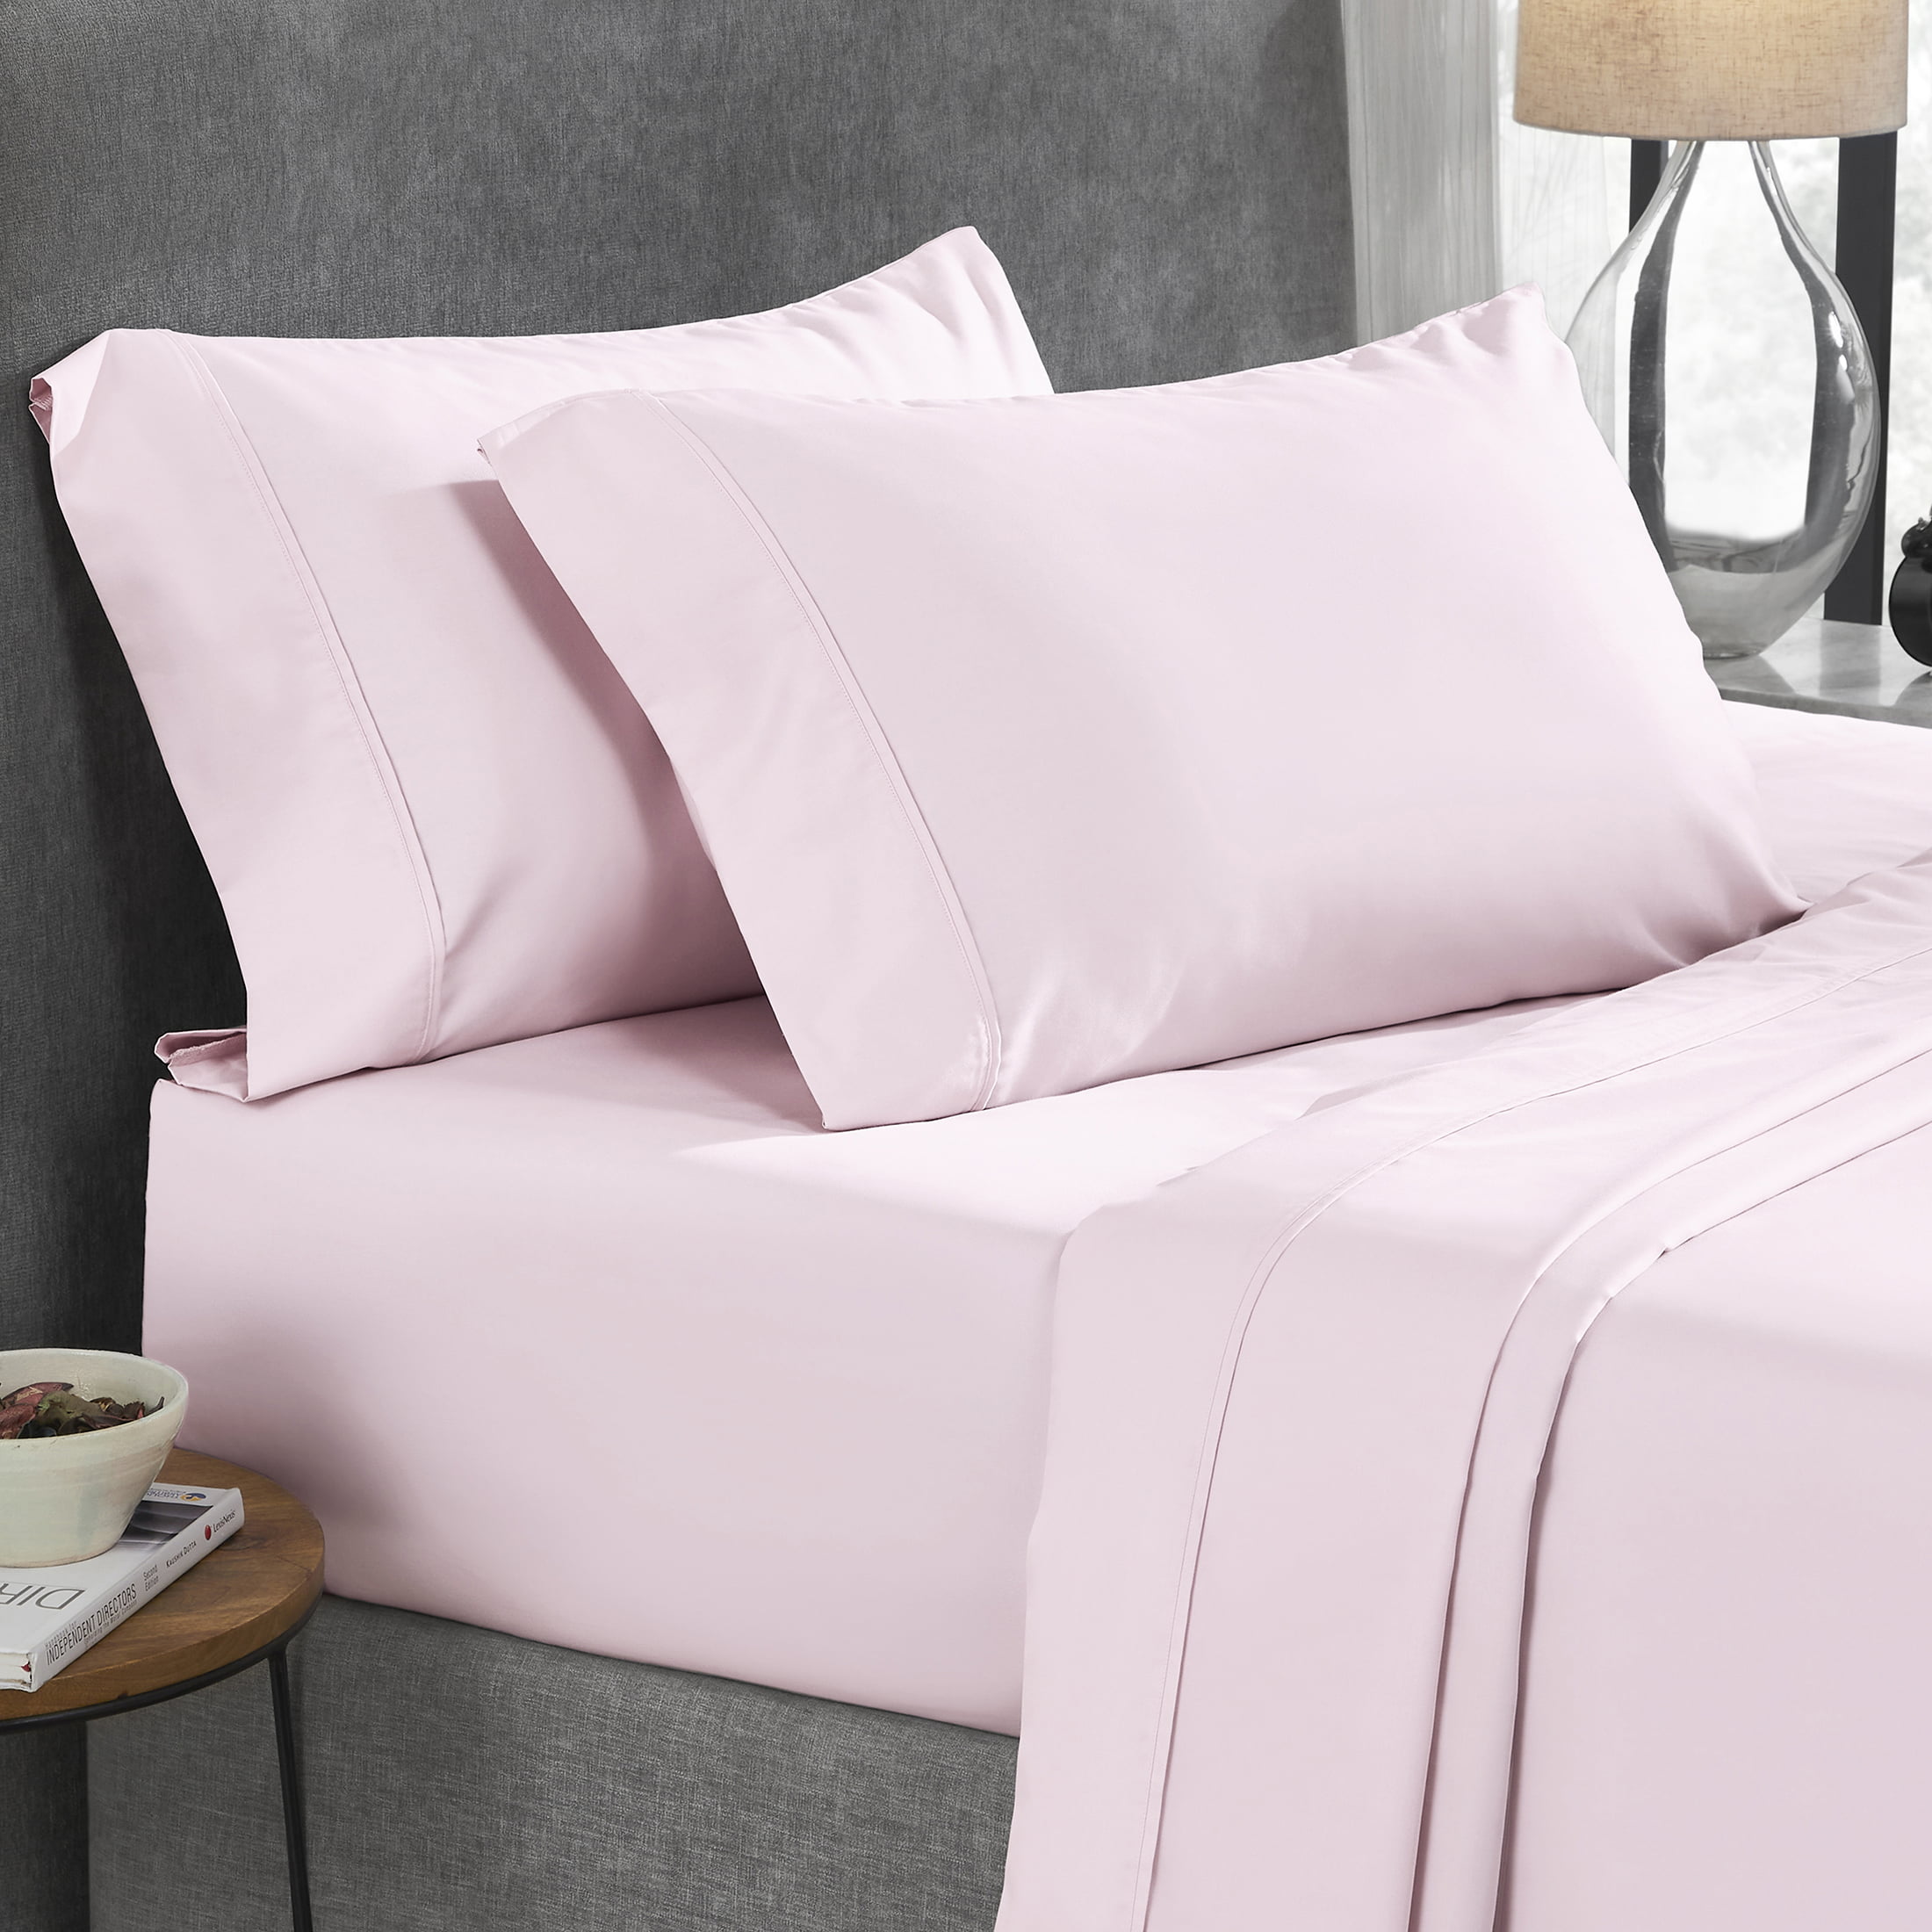 Details about   Cozy Bedding Item Extra Deep Pocket 1000TC Organic Cotton US Twin Size All Color 